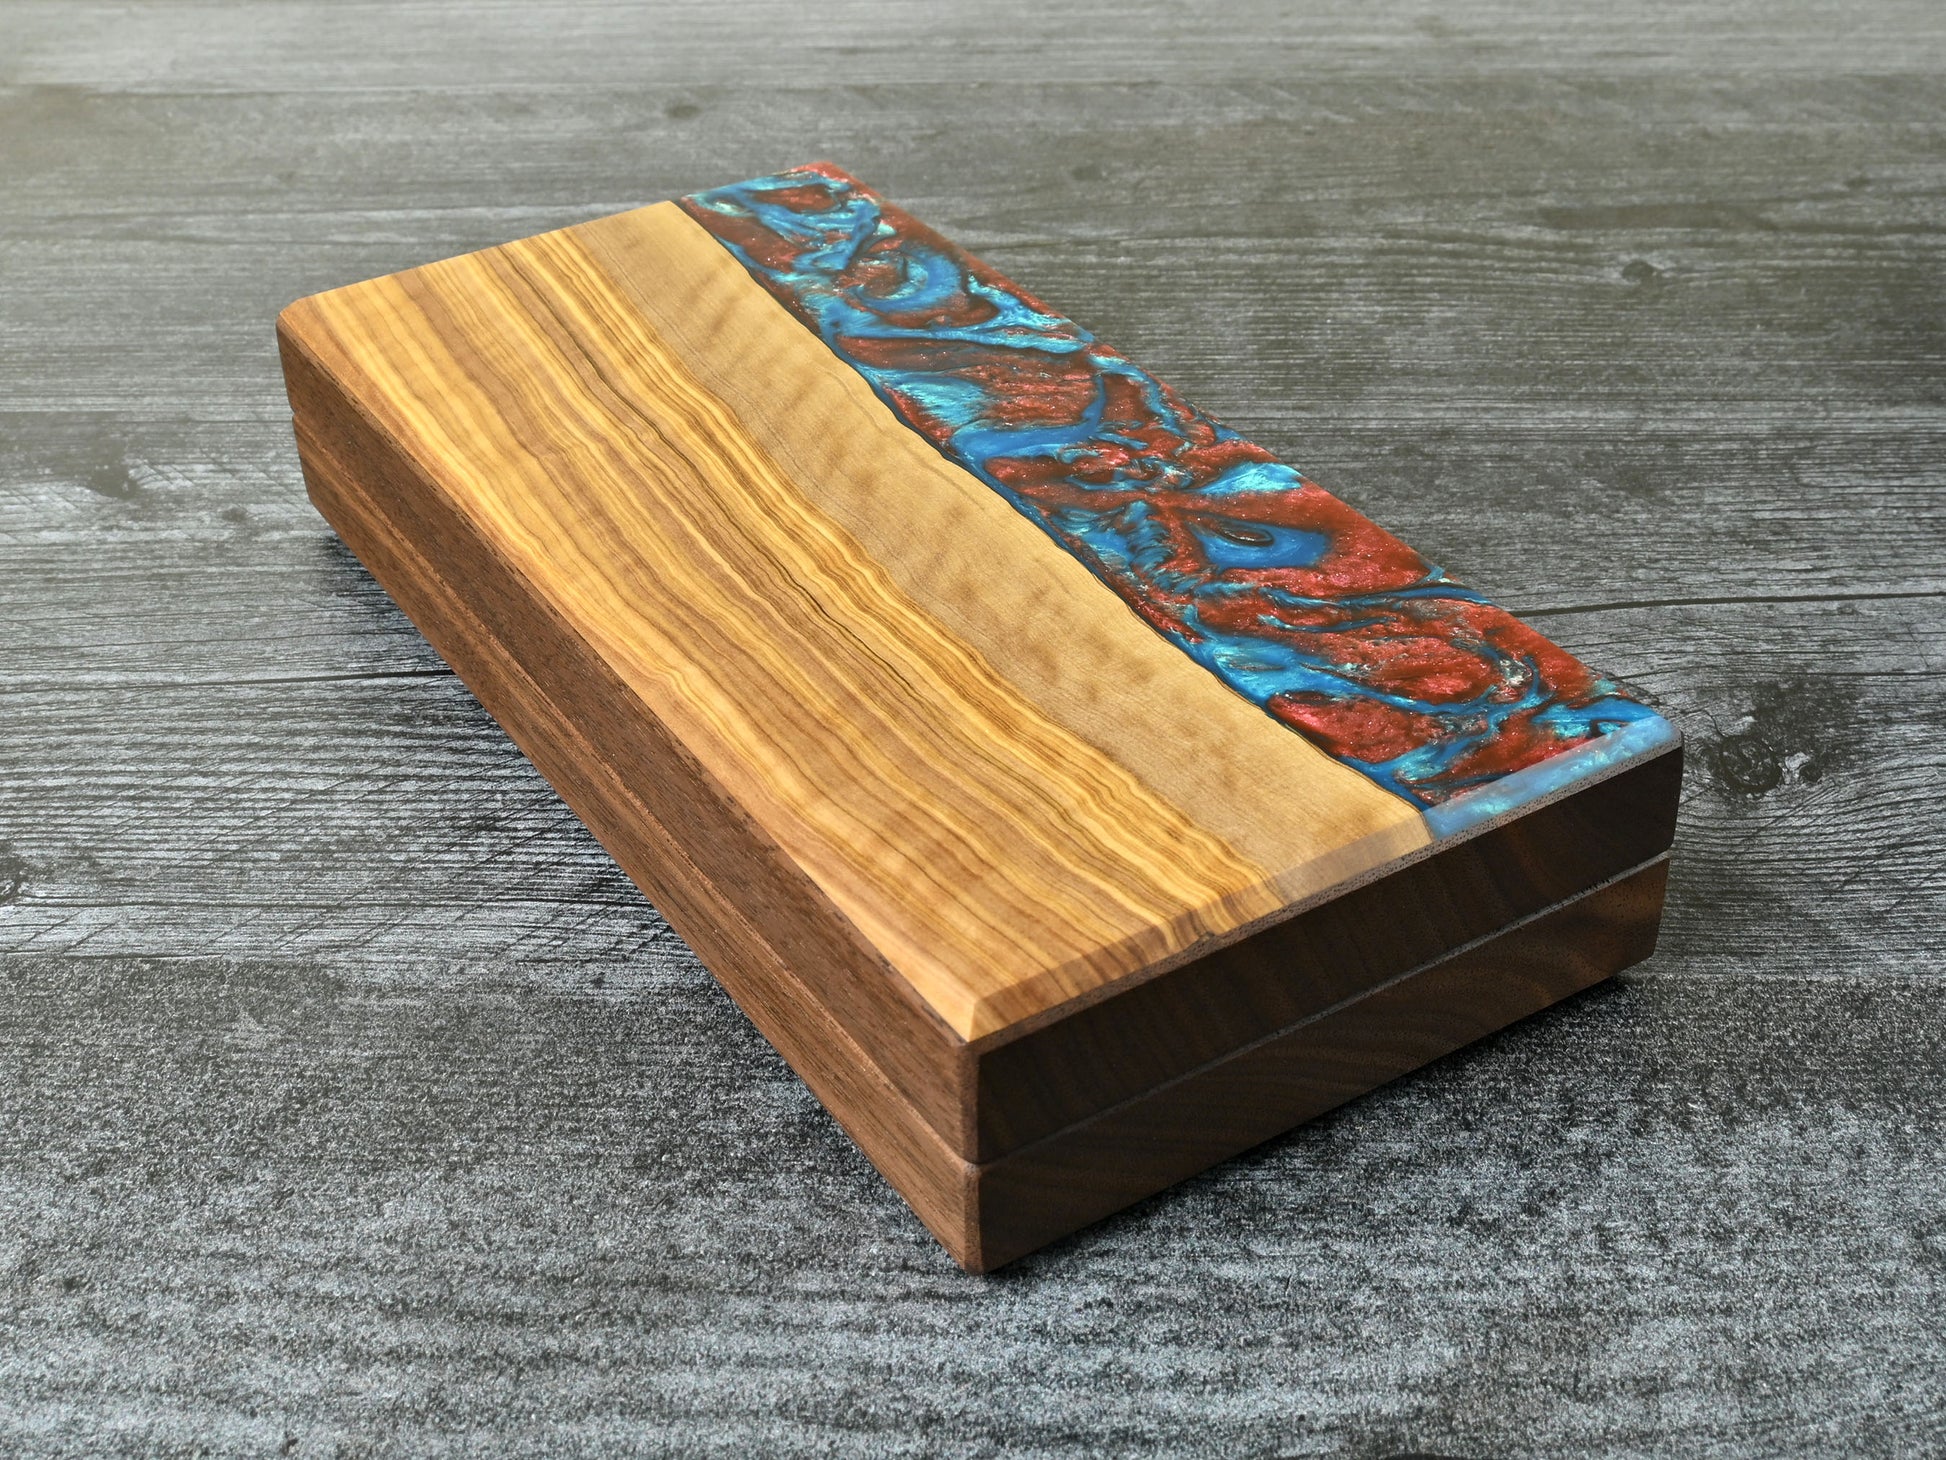 Delver's Kit Dice Box featuring a walnut core and an olivewood top veneer with blue and red resin. Made for D&D ttrpg.